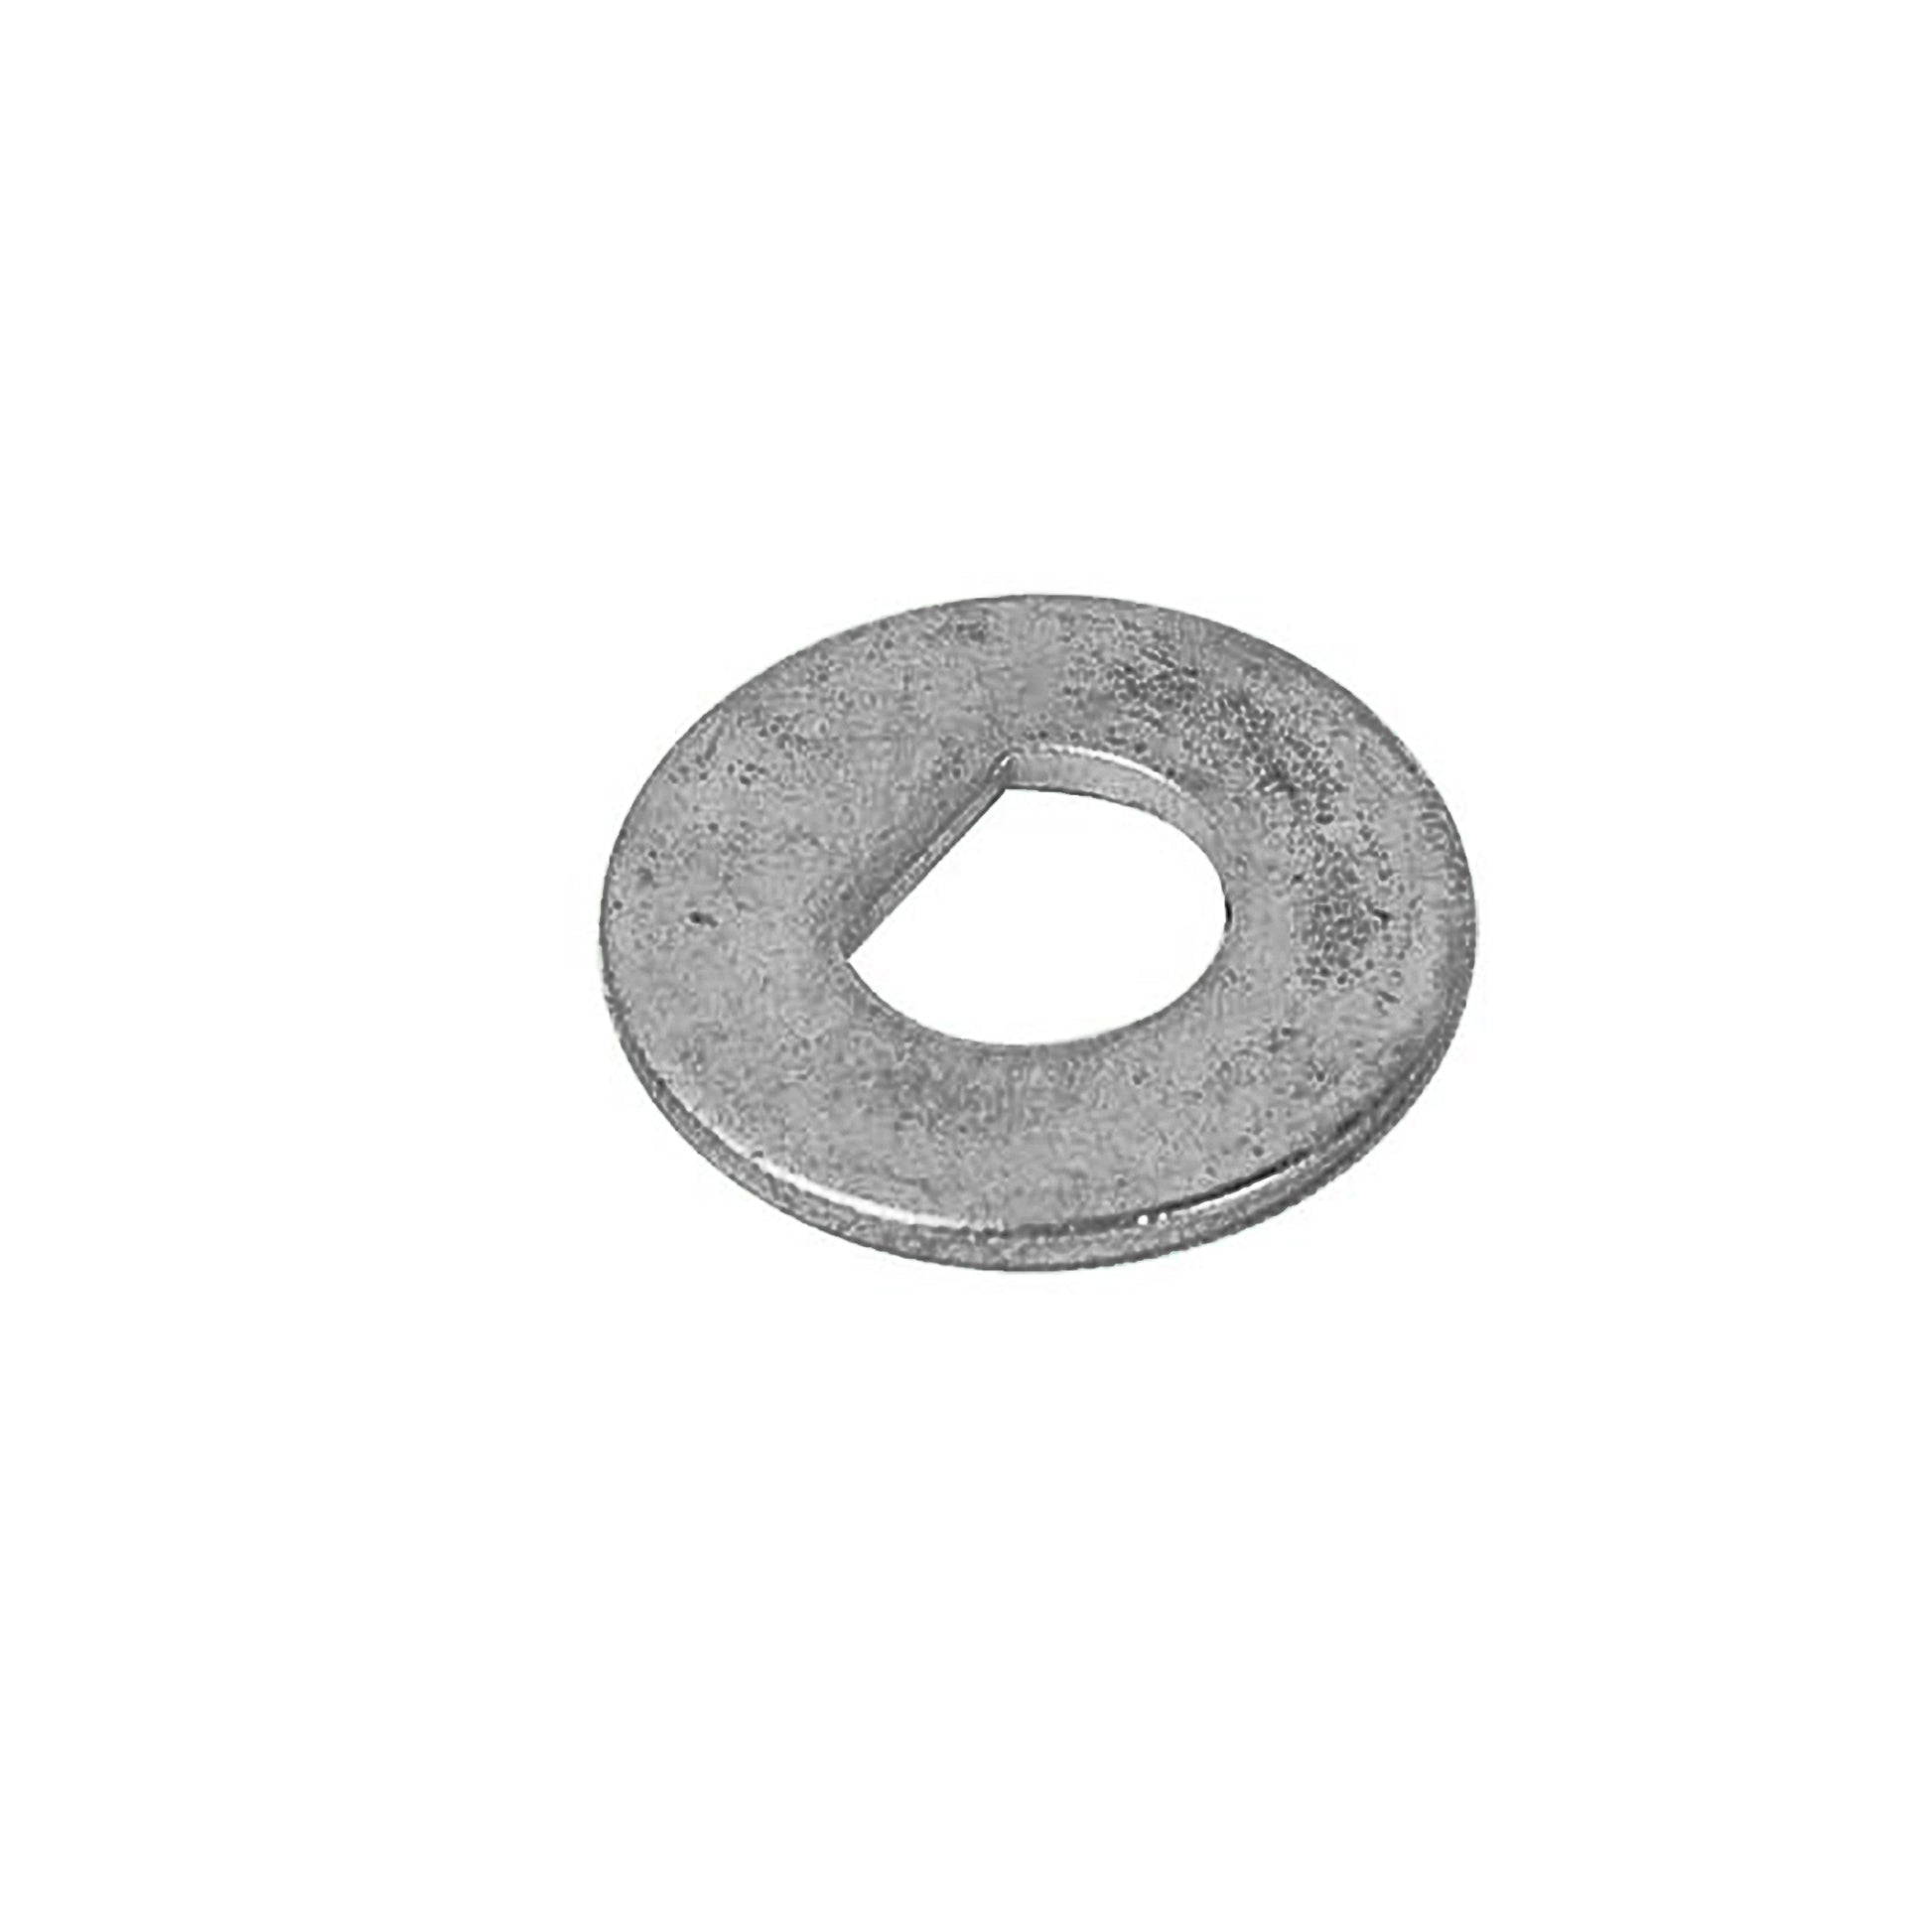 D-shaped Washer for 800-Series Air Mover